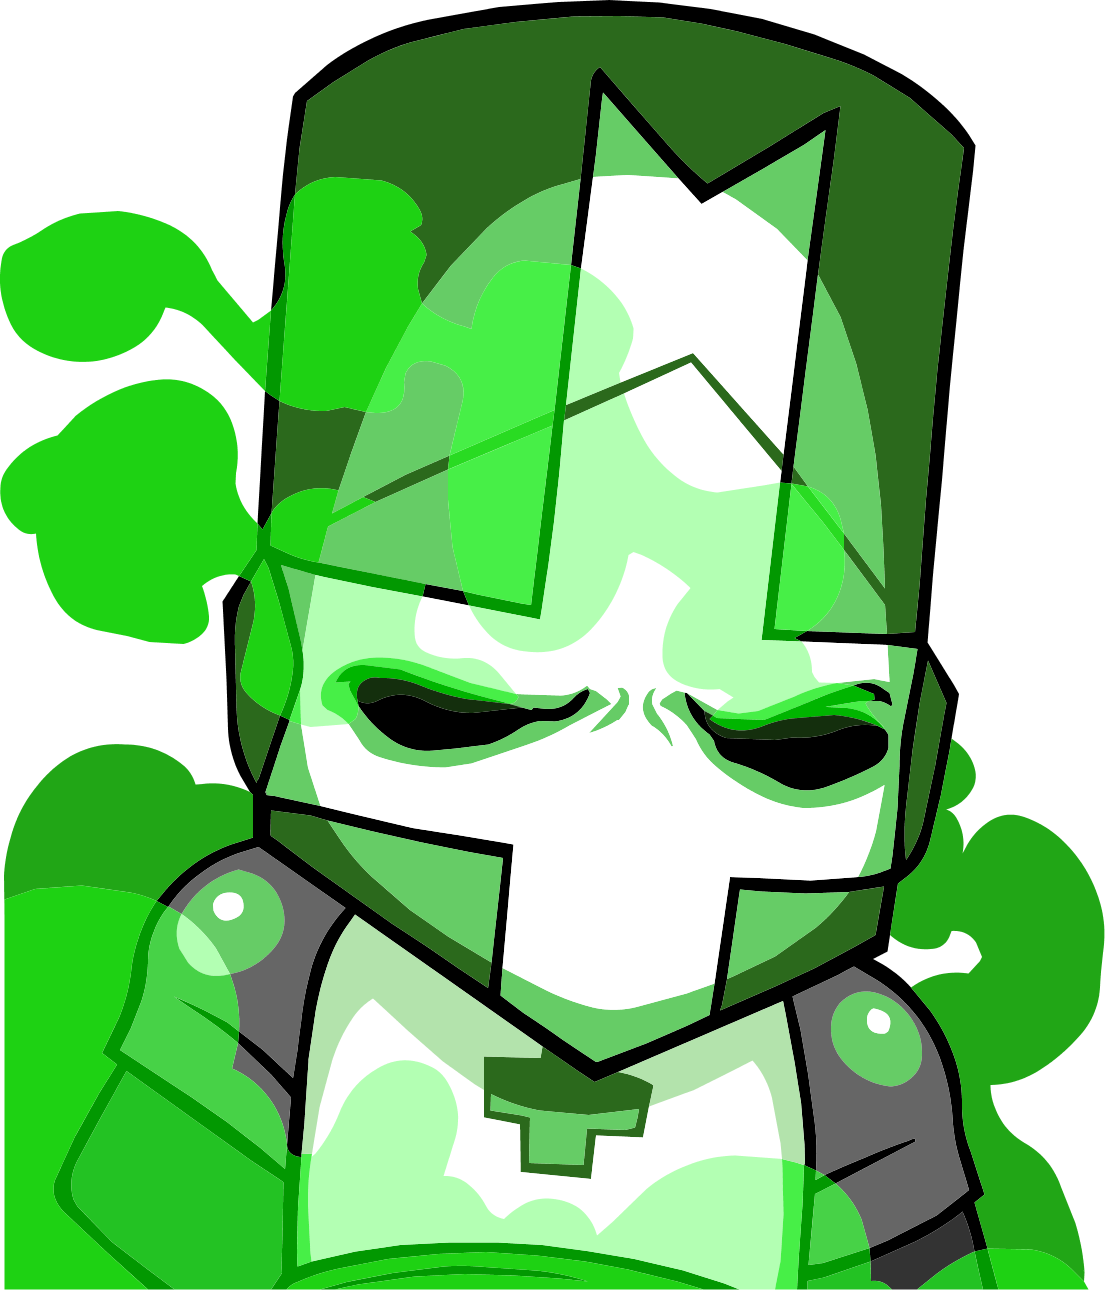 how to get all the characters in castle crashers for pc